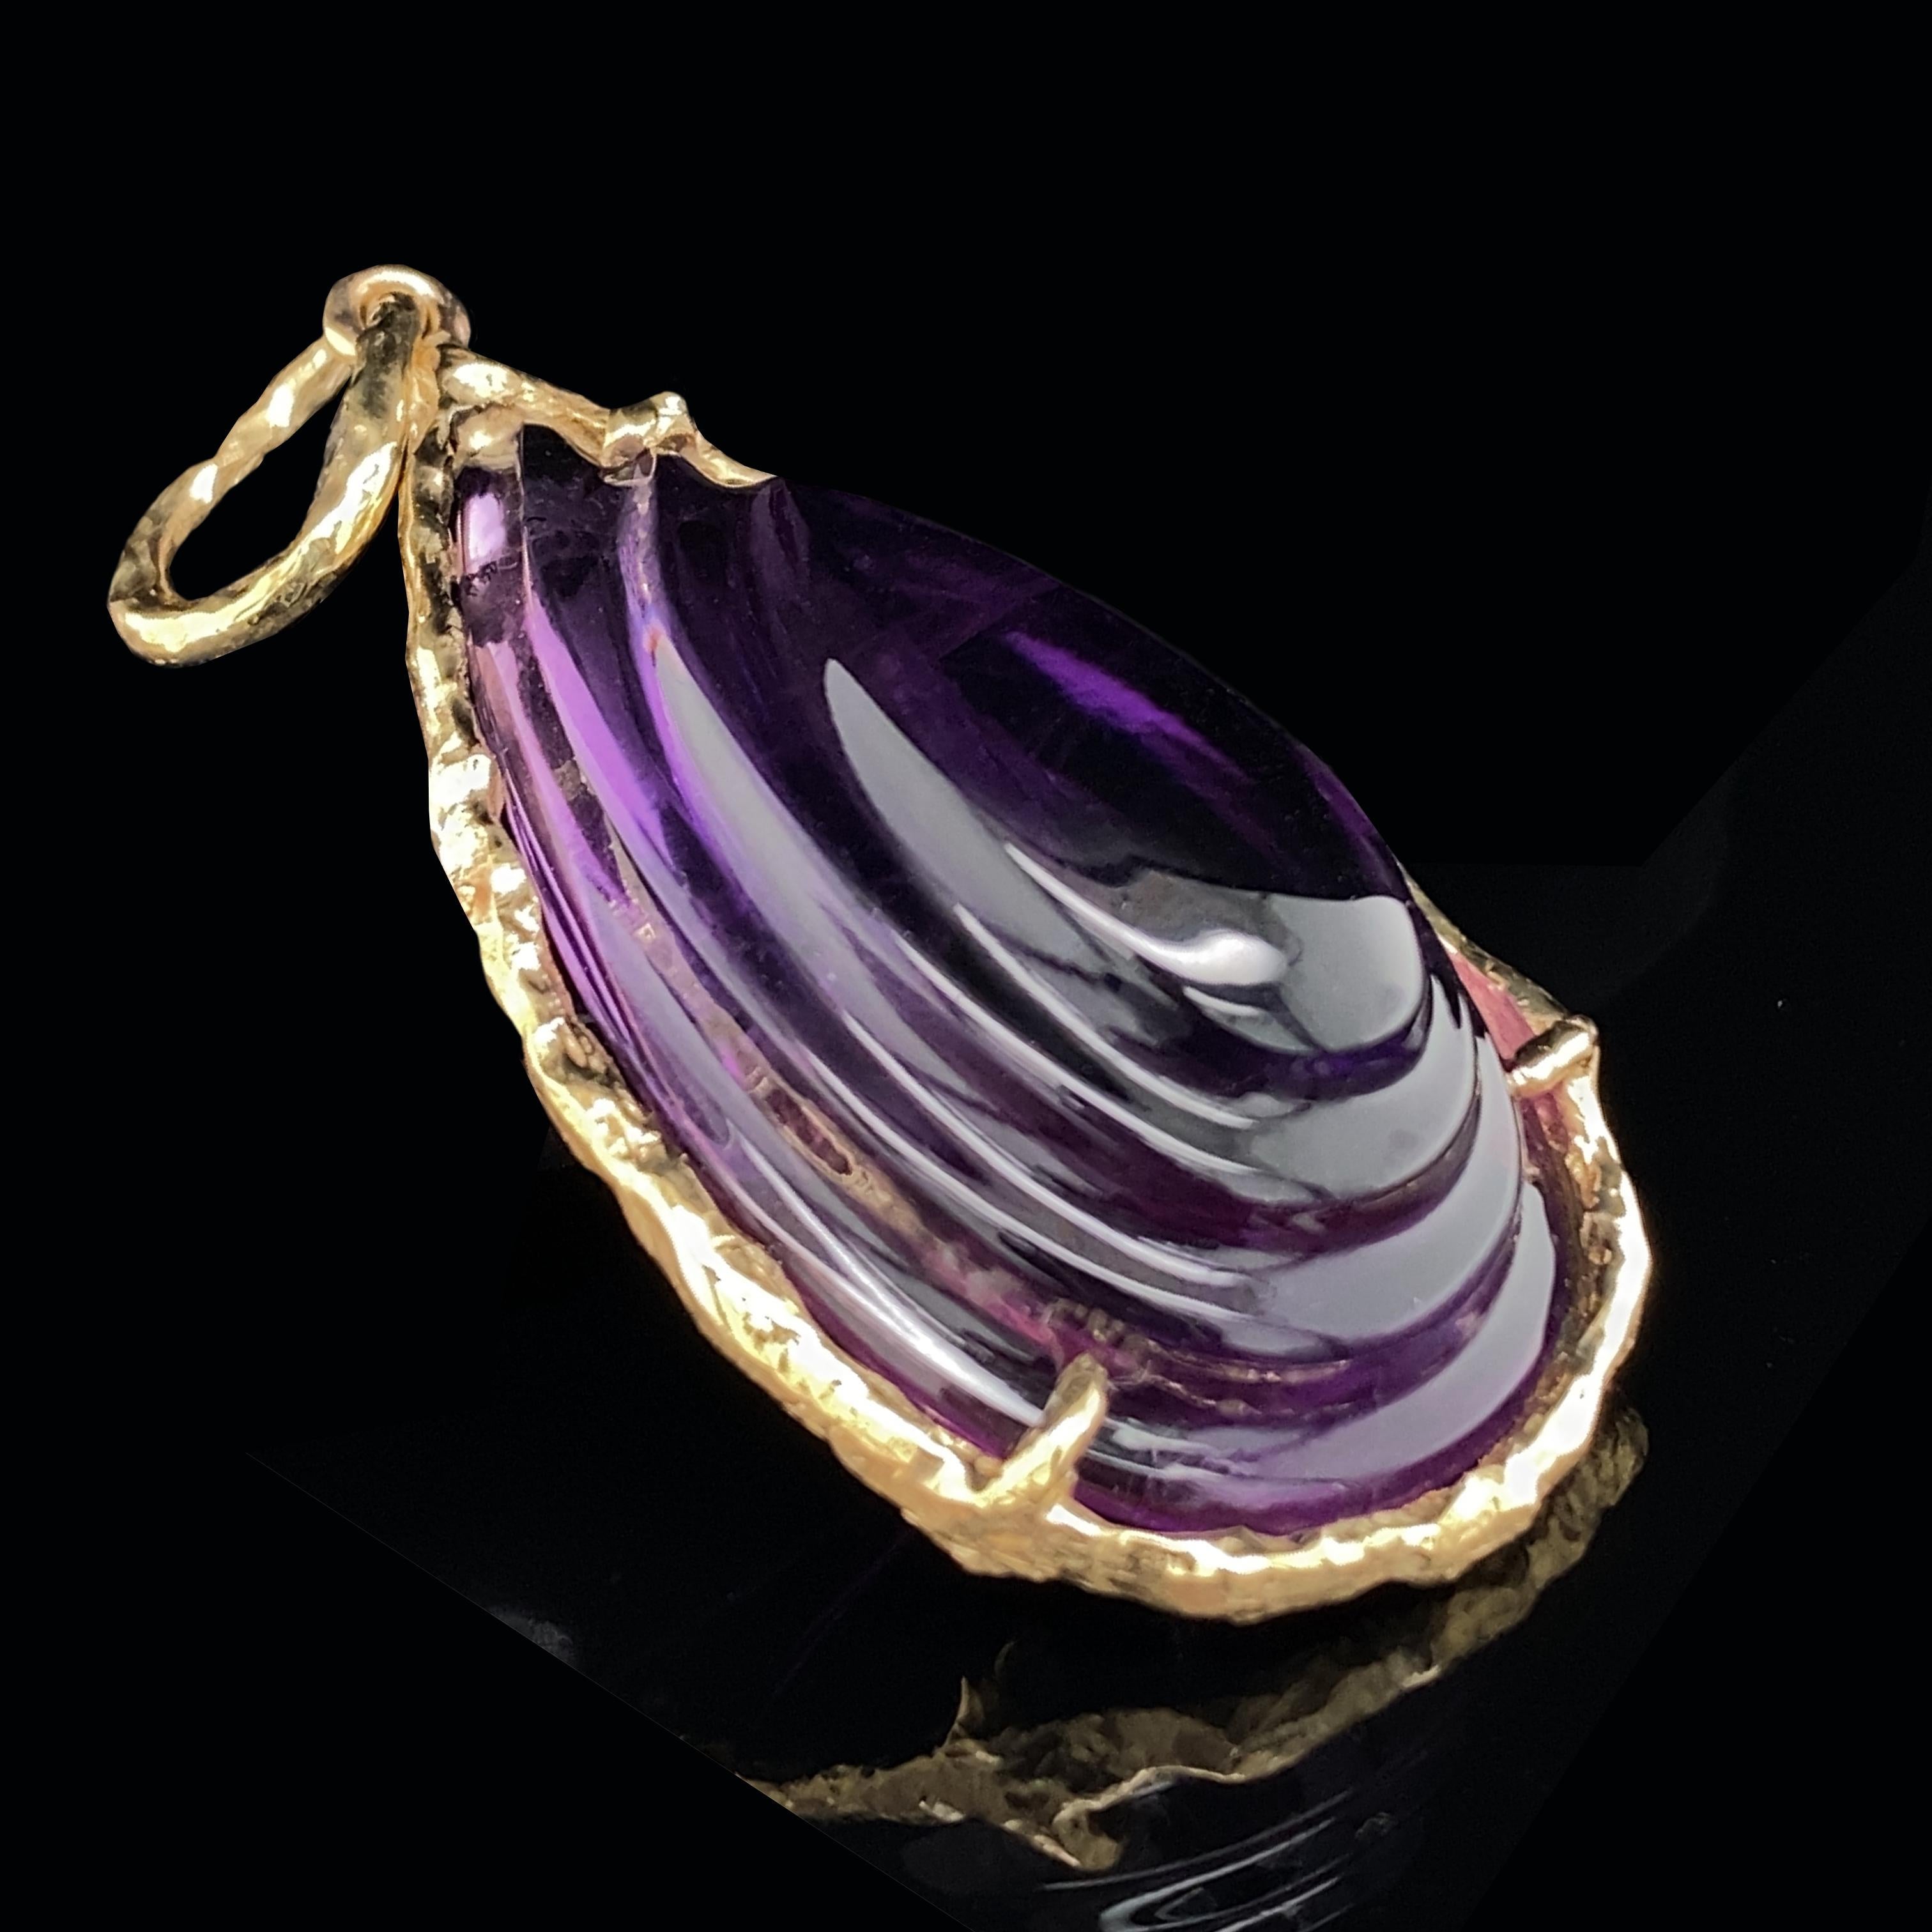 39 Carat Carved Amethyst Pendant in 18K Gold on Convertible Amethyst Bead Chain For Sale 6